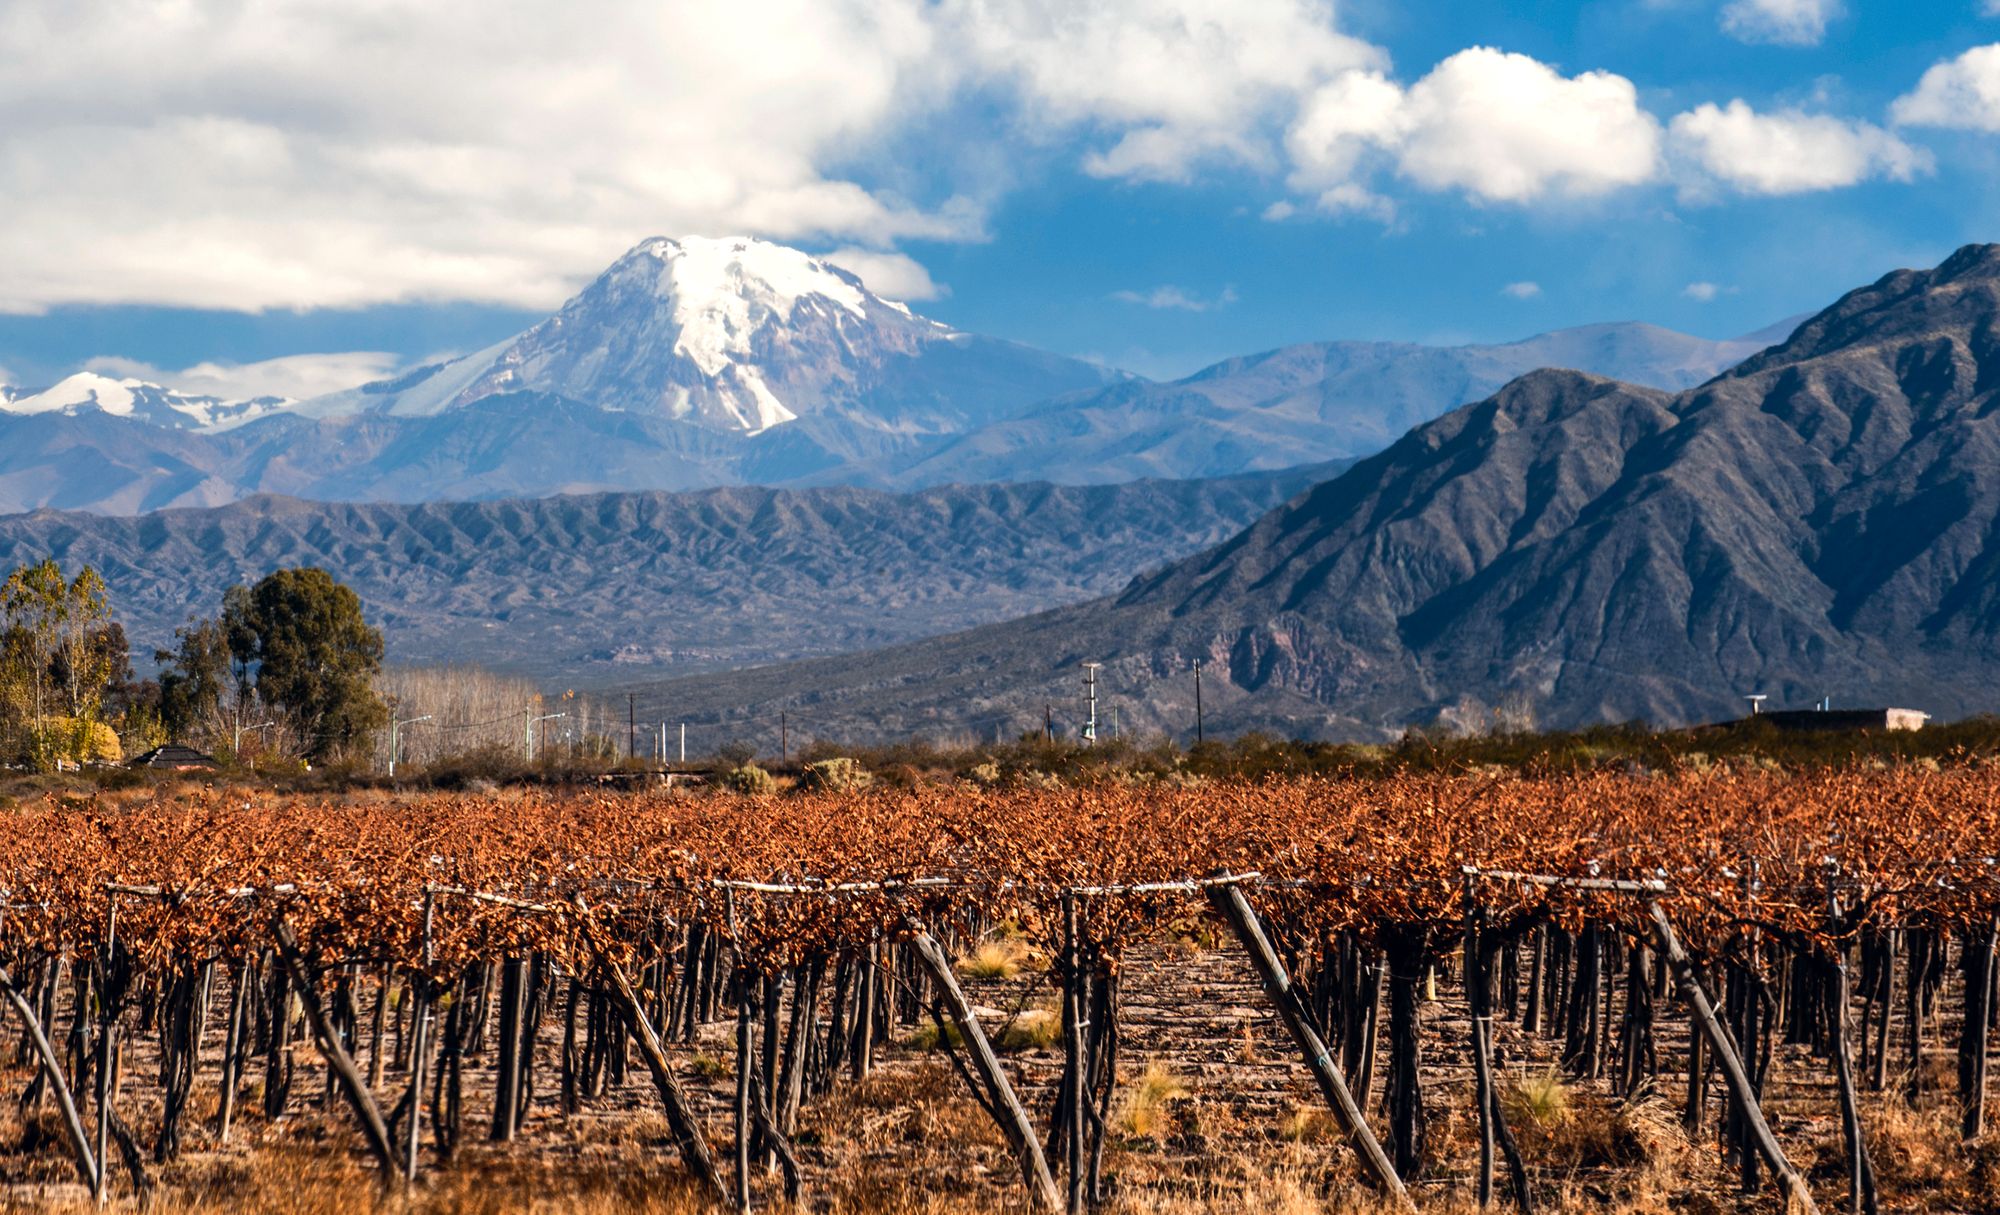 A Brief History of Argentina’s Wines